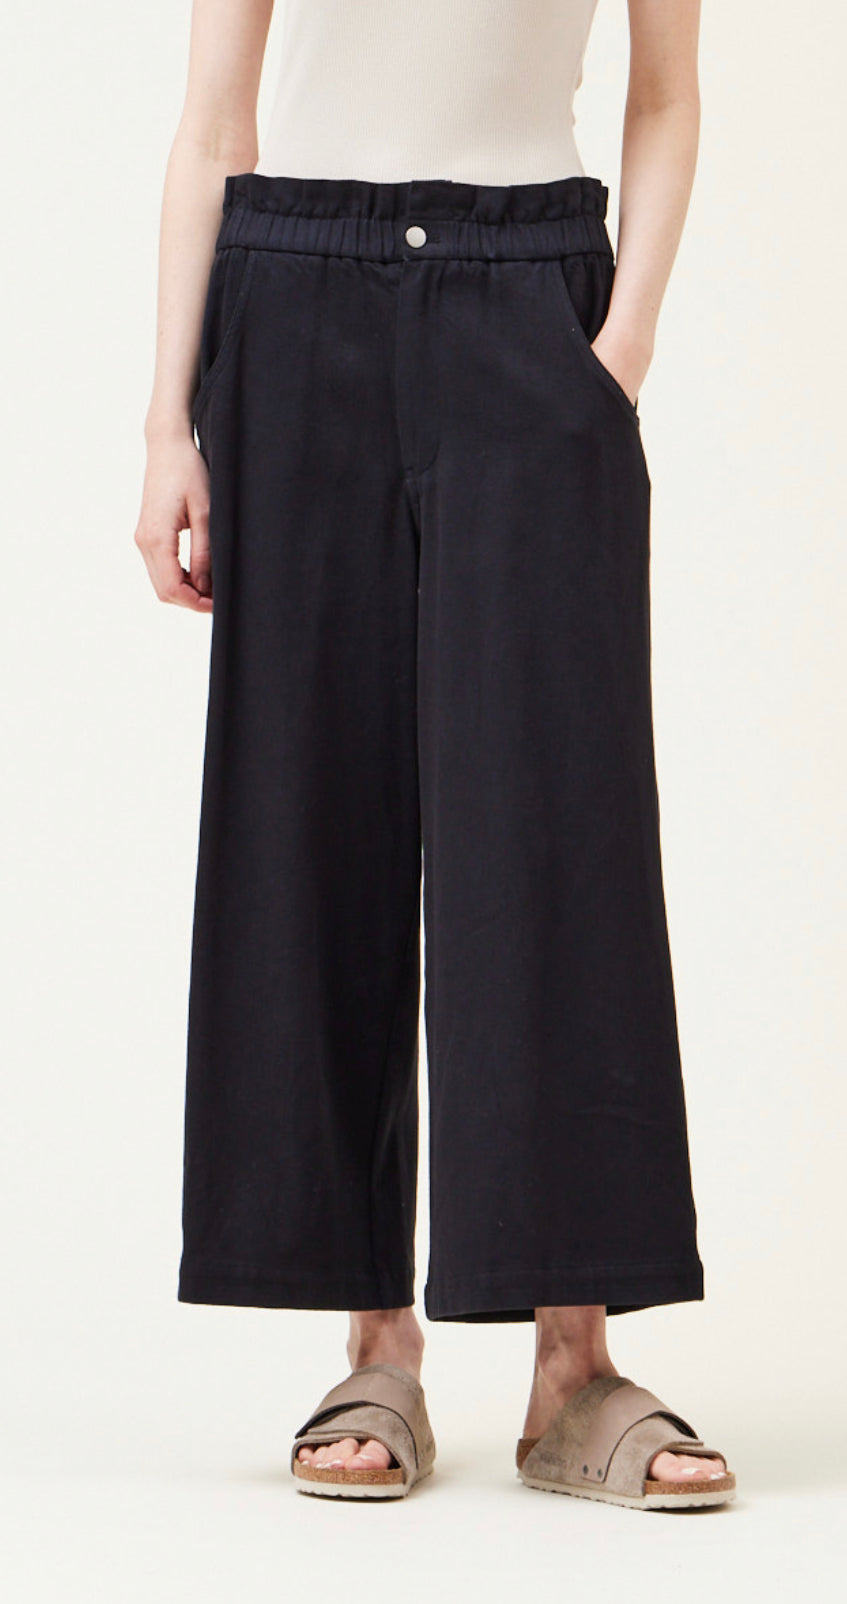 Cotton Blend Twill Pants- Faded Black